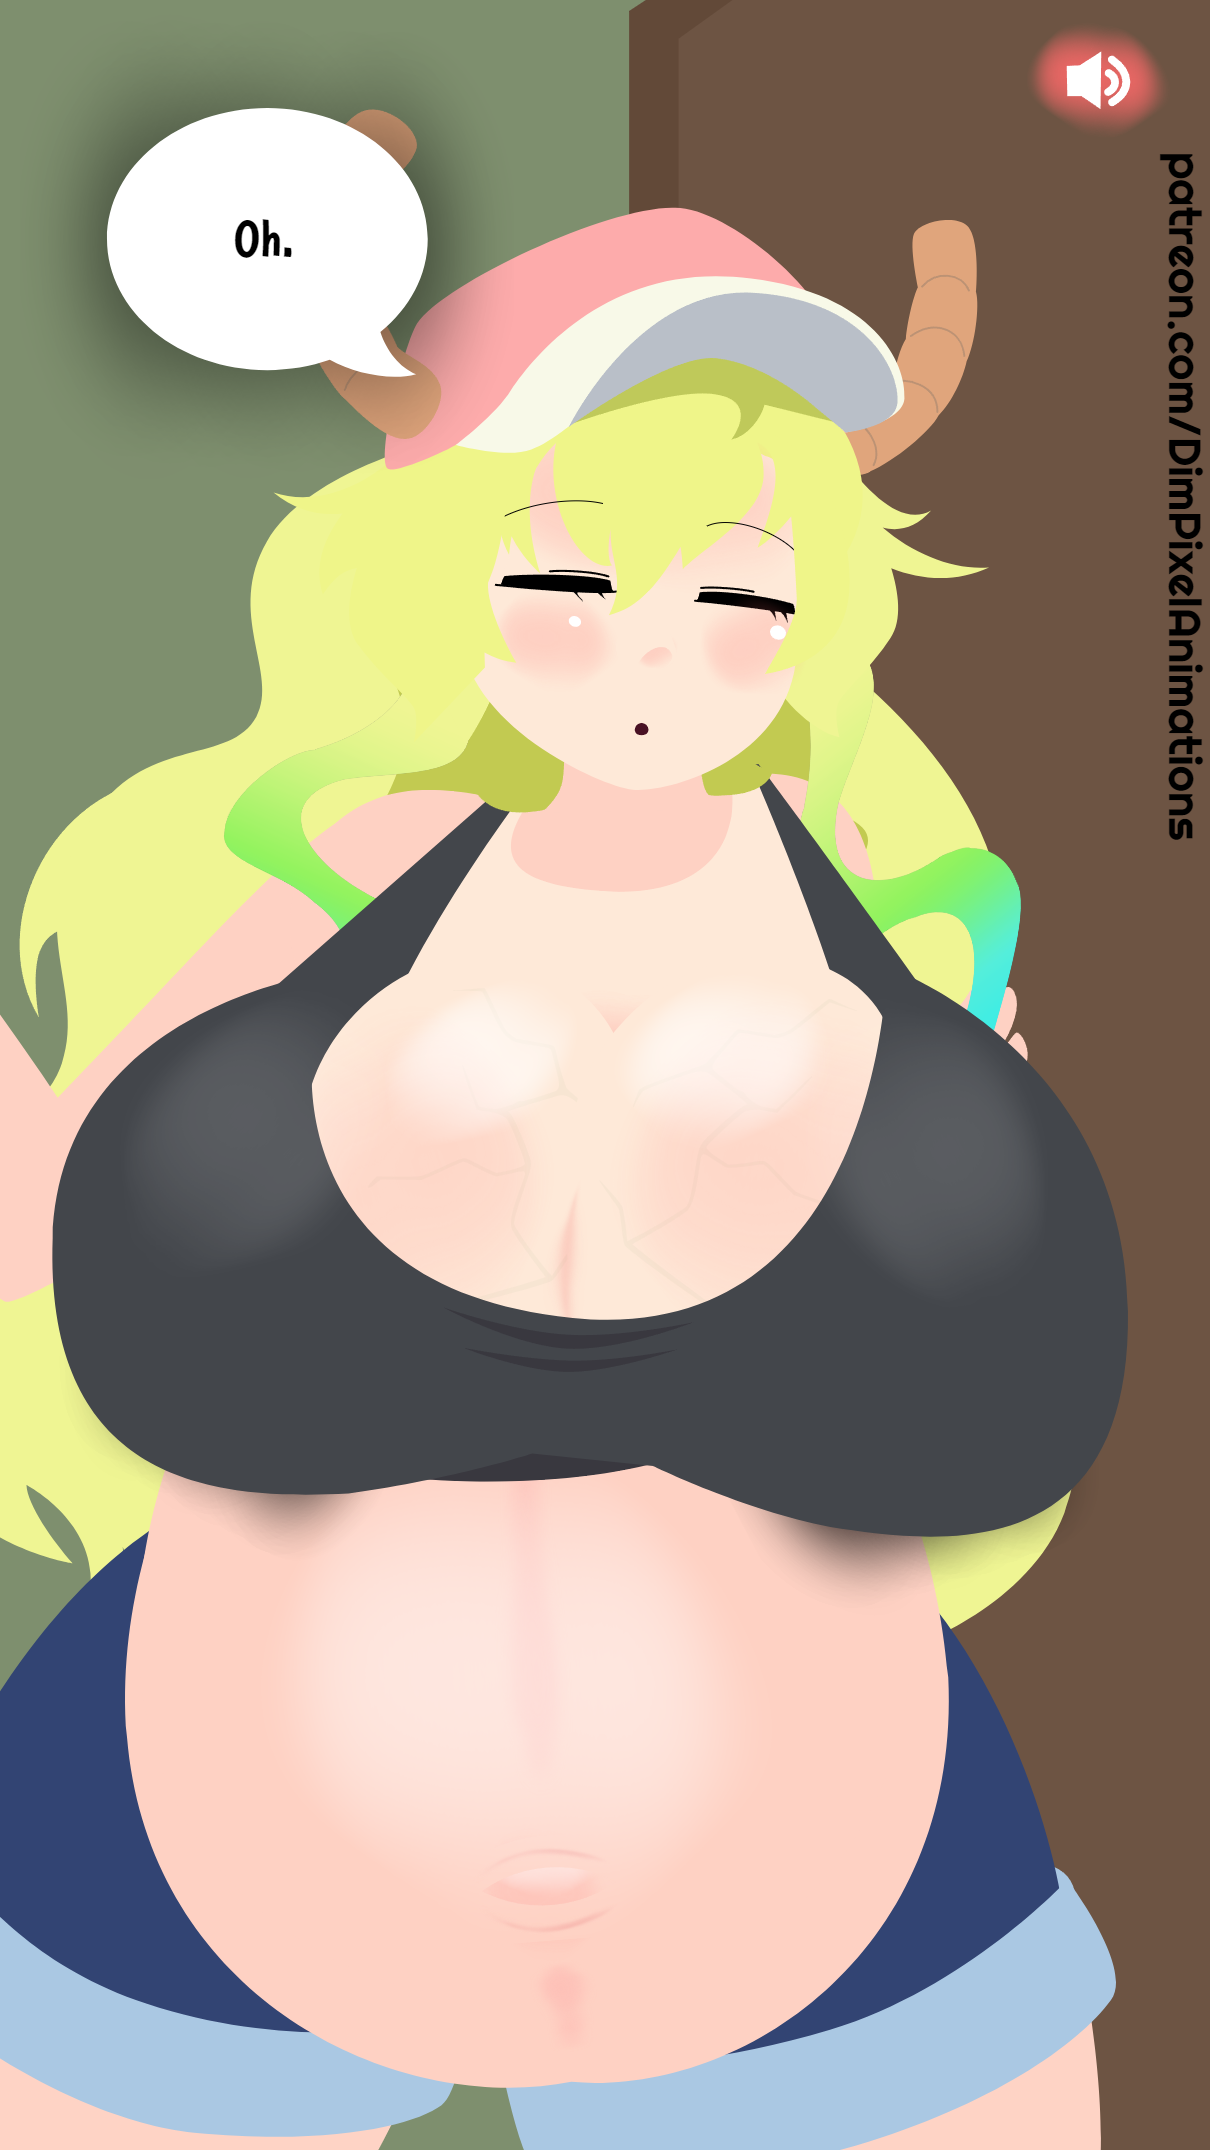 Lucoa expansion